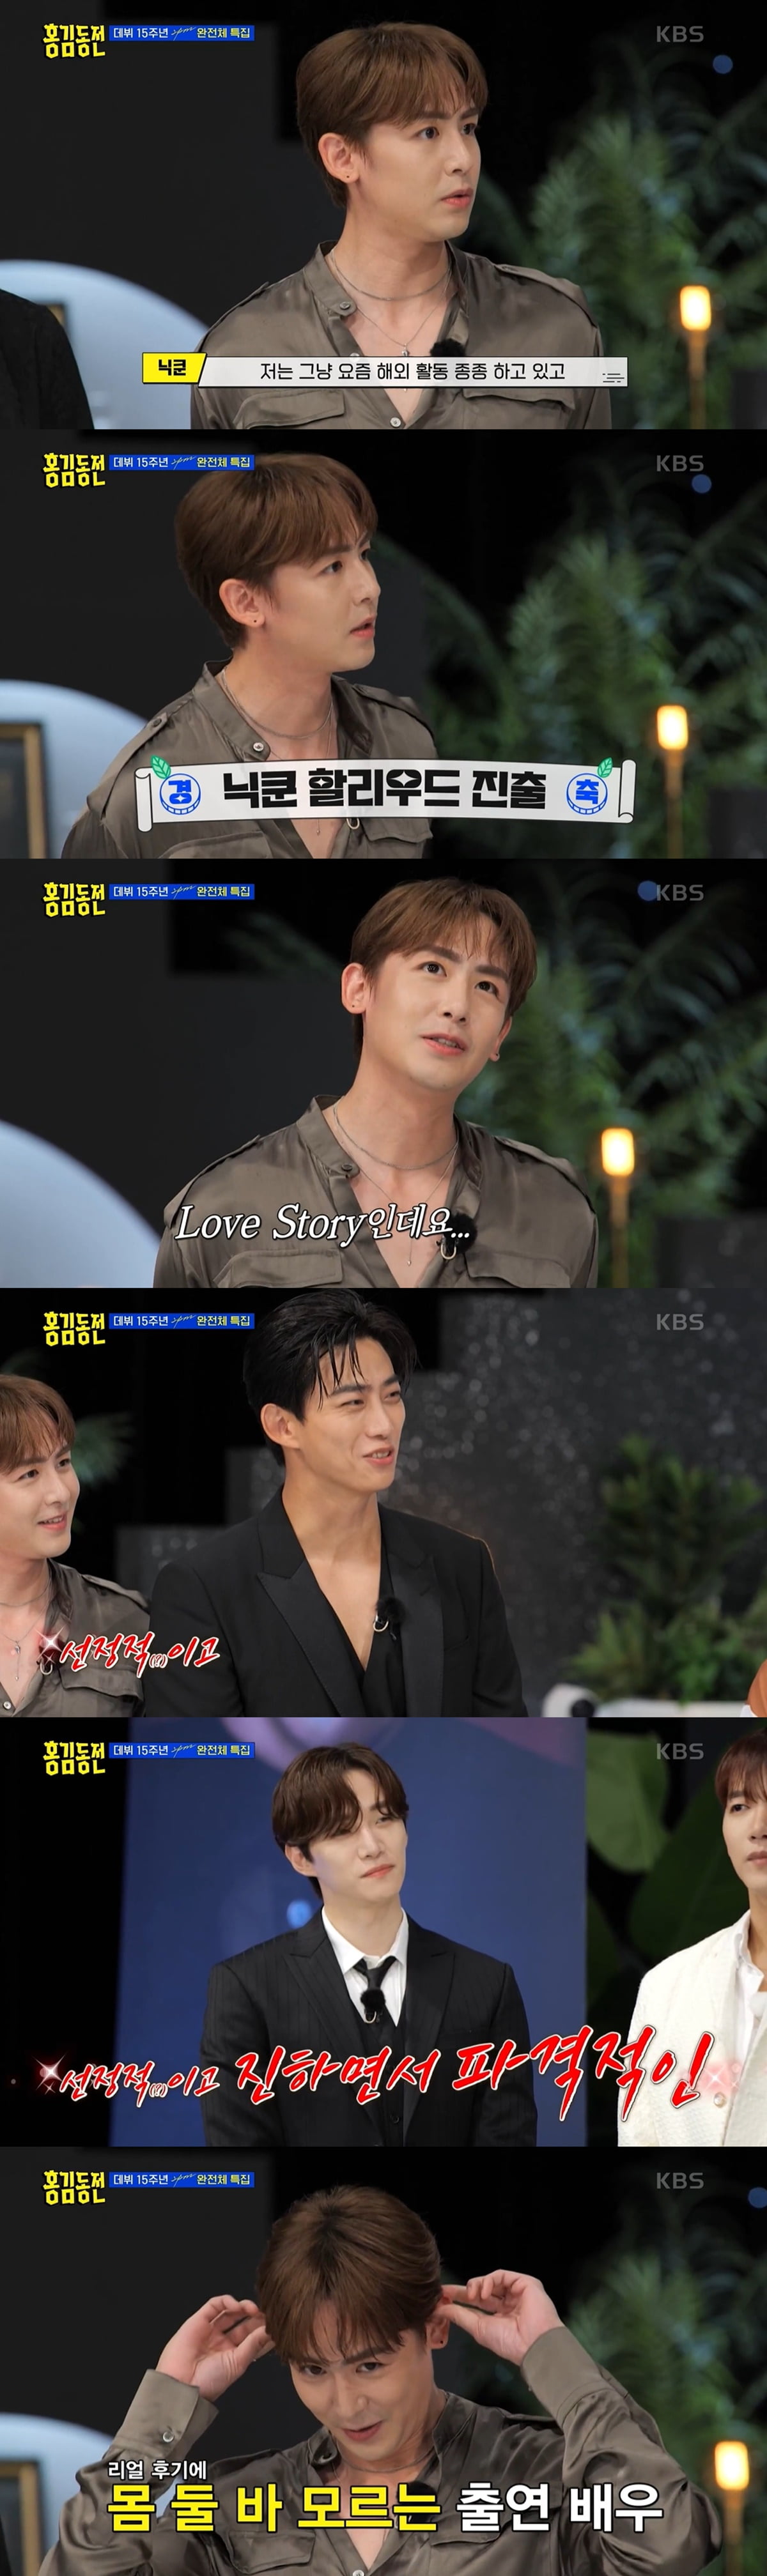 2PM Nichkhun says “Mom should never see my Hollywood entry”